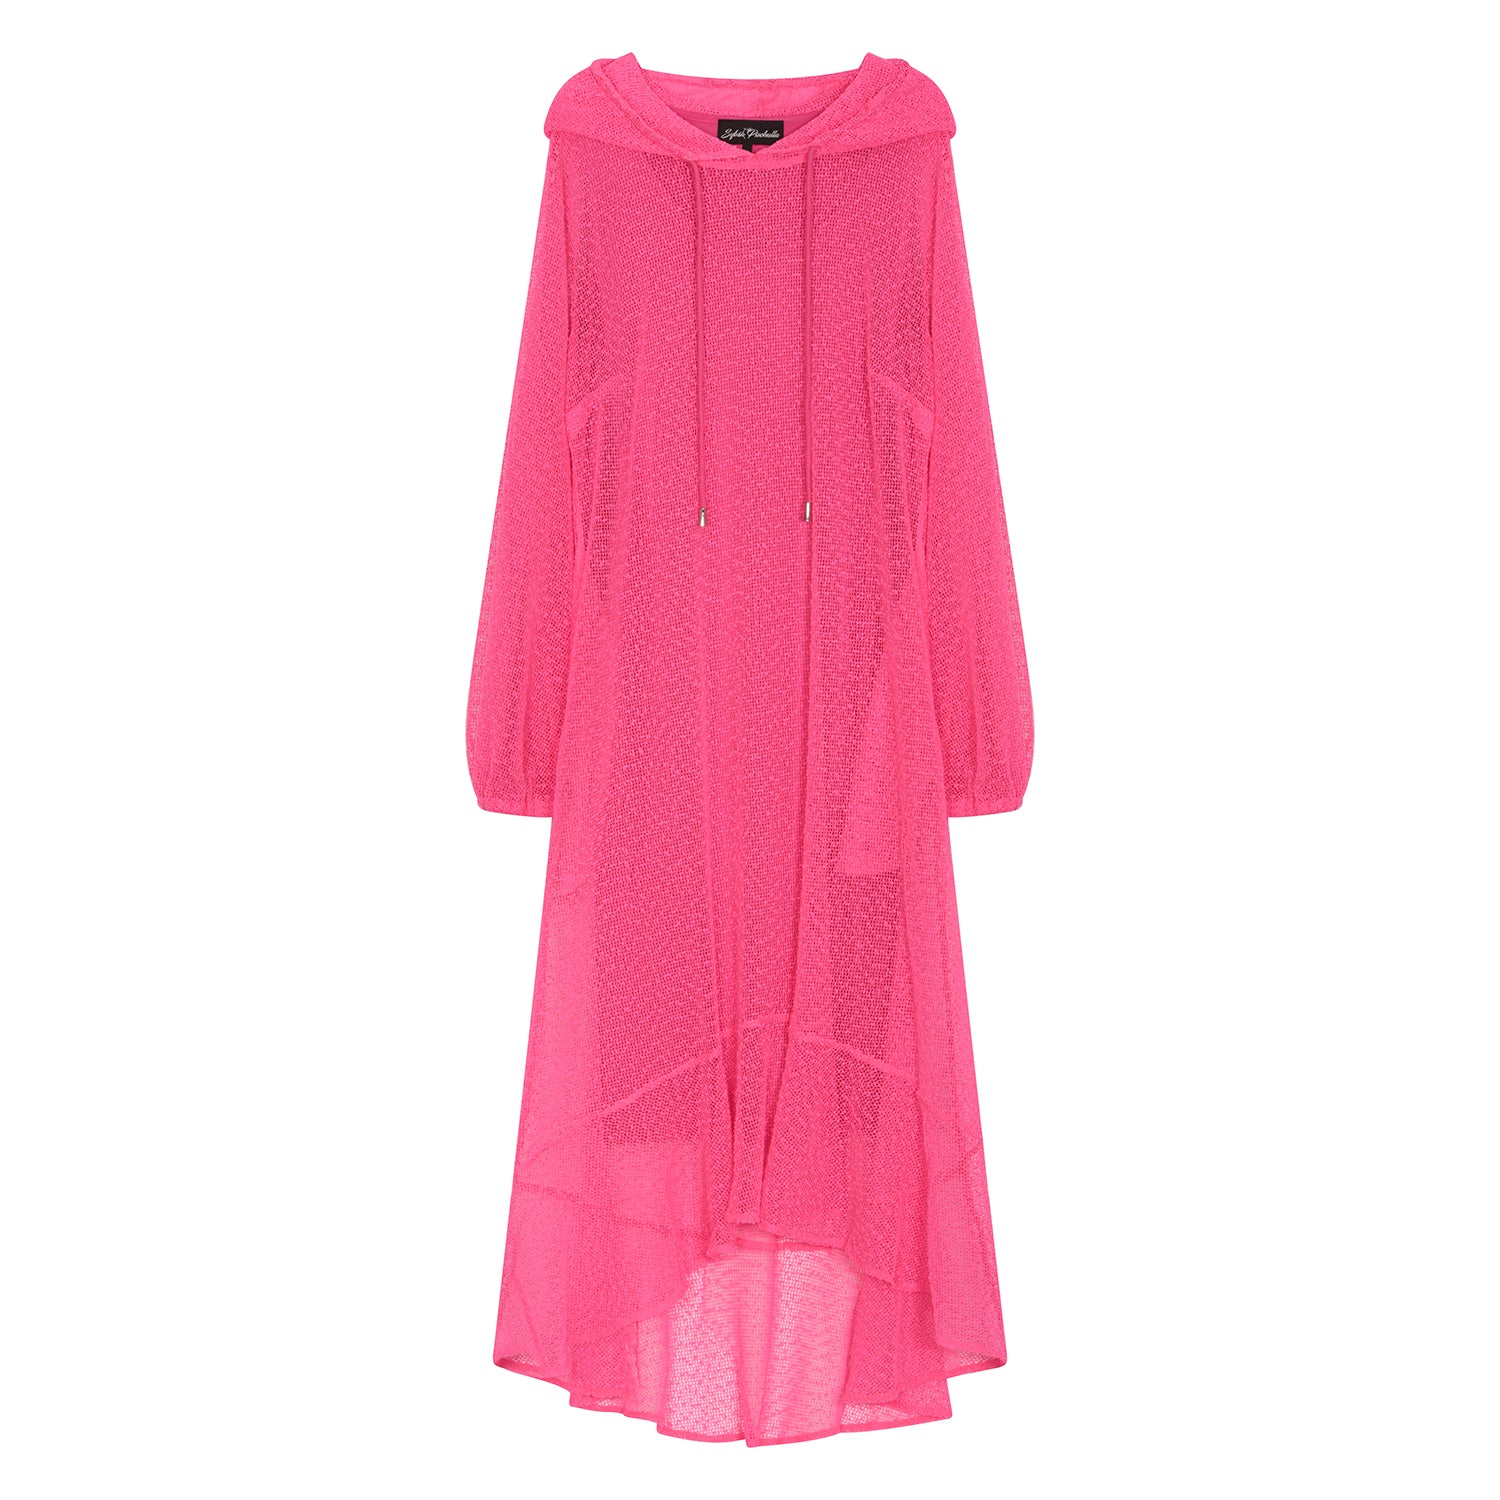 Women's Aphrodite Hot Pink Holiday Resort Dress with hoodie and hot pink  undergarment, presented in a cutout image to showcase the vibrant design.